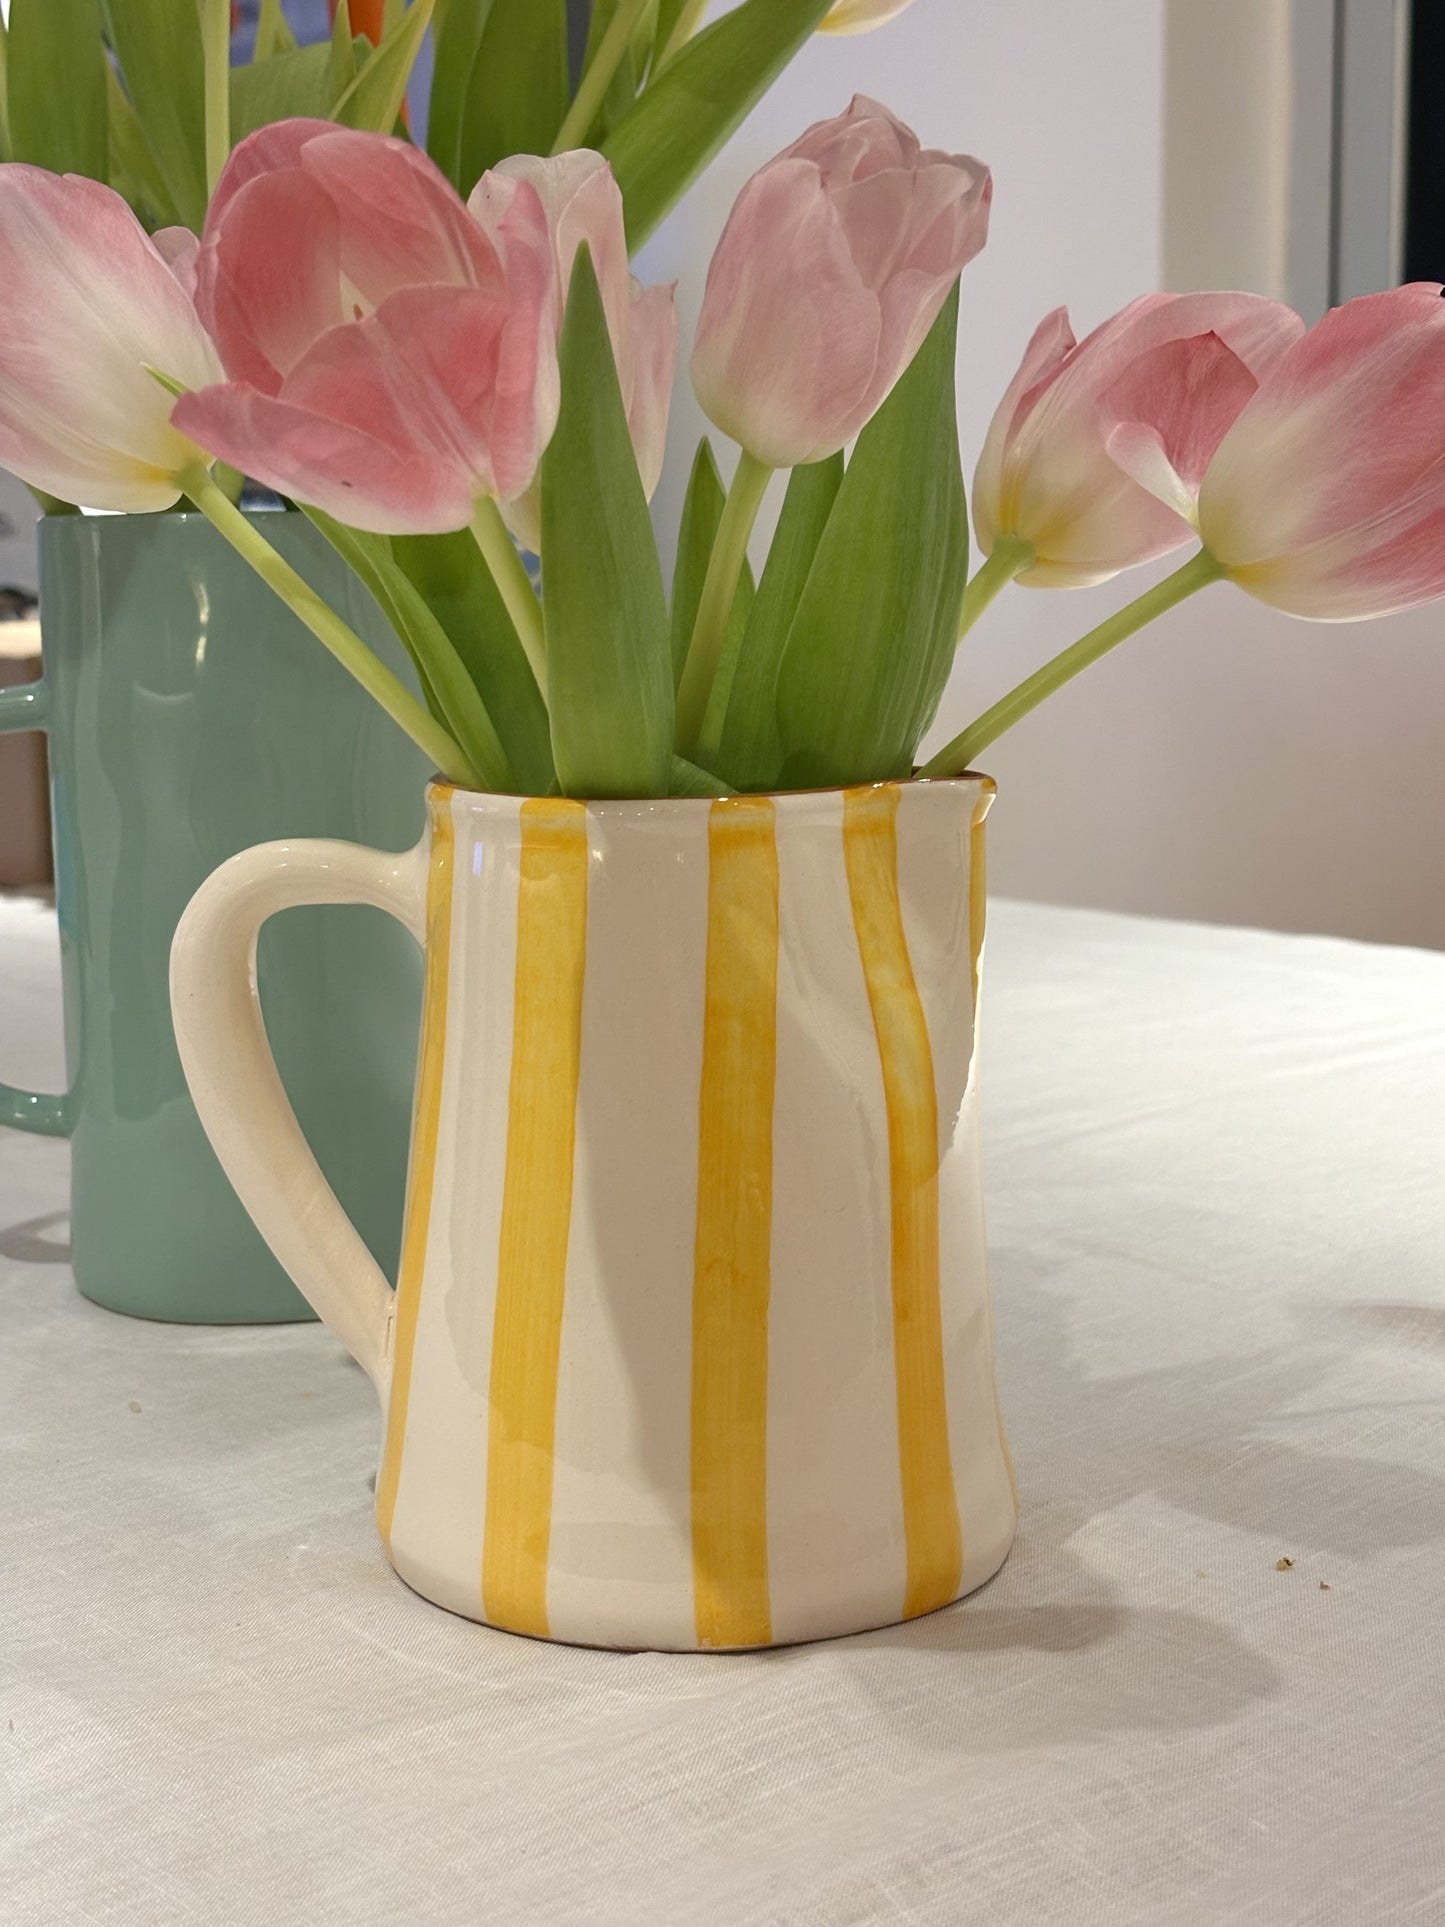 A handpainted yellow and white striped jug with tulips in.